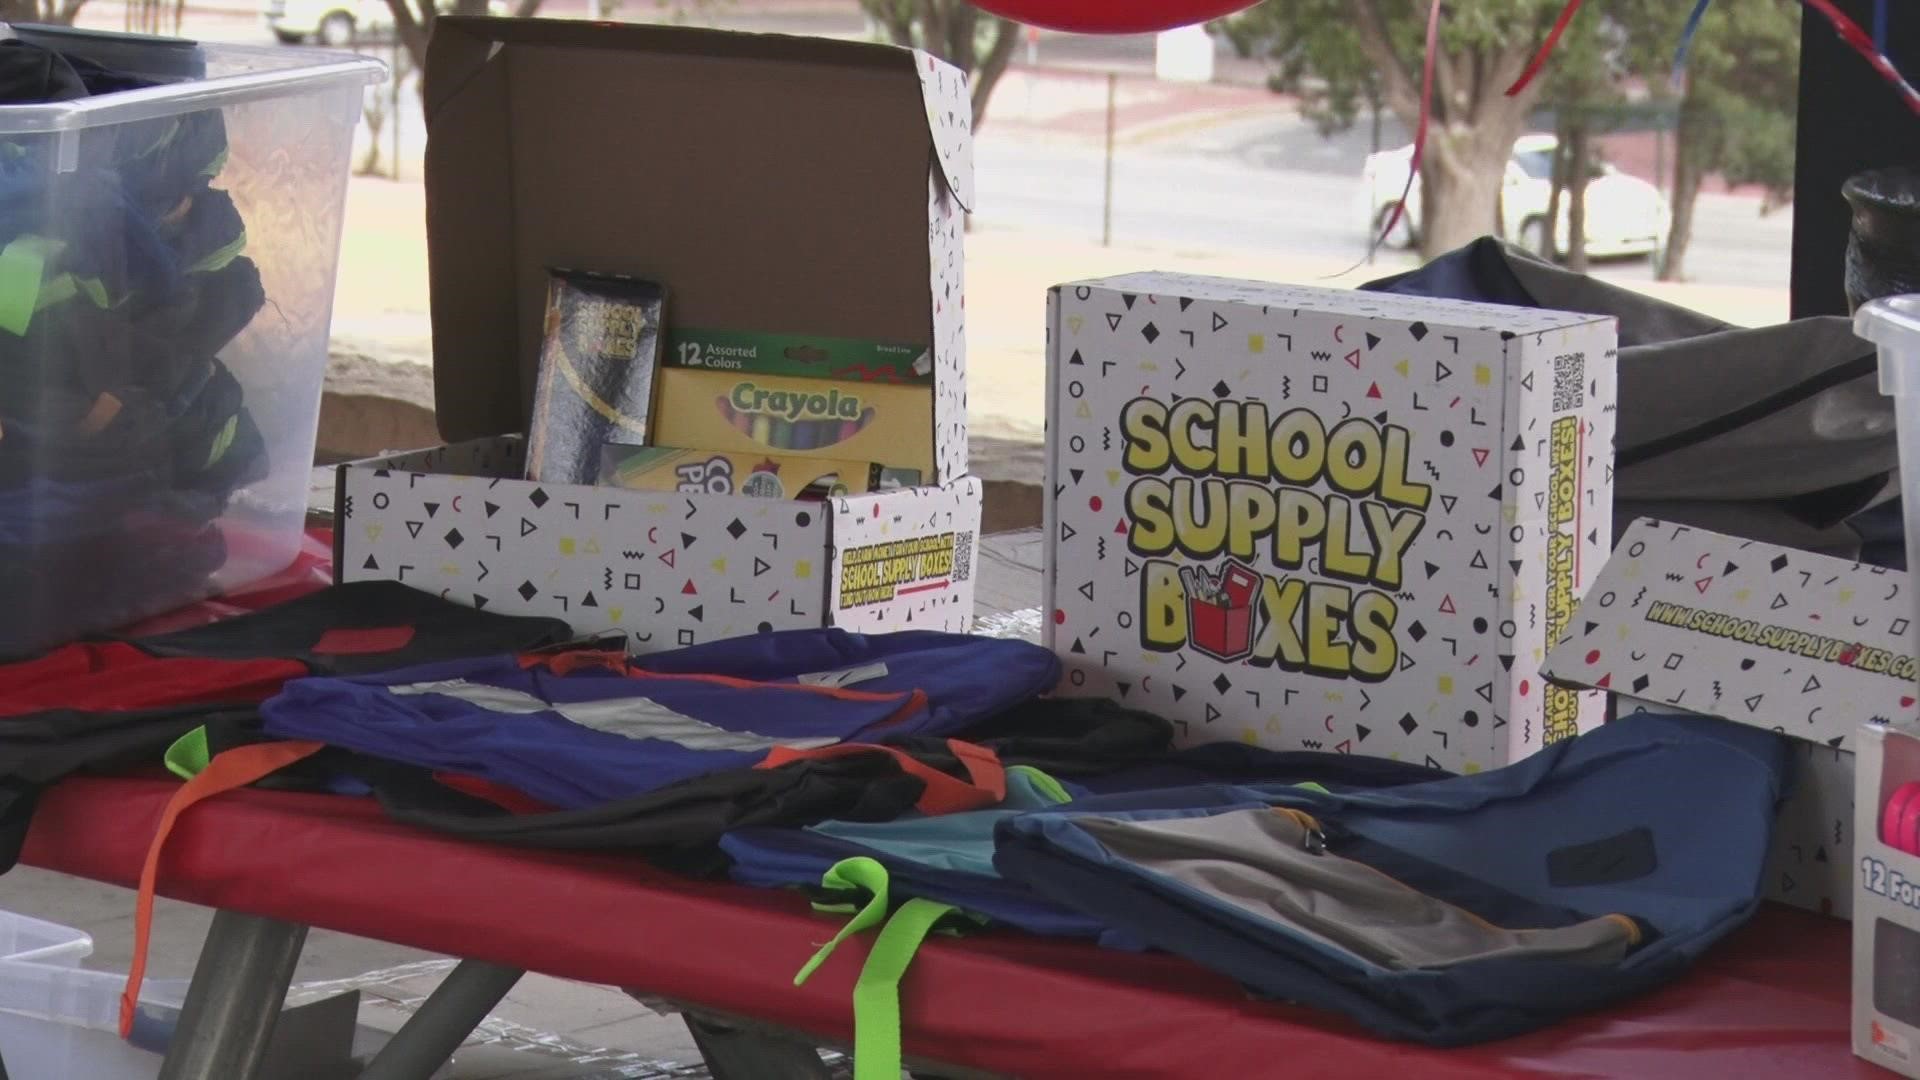 One local organization is making sure students are prepared with the necessary supplies for the upcoming school year.